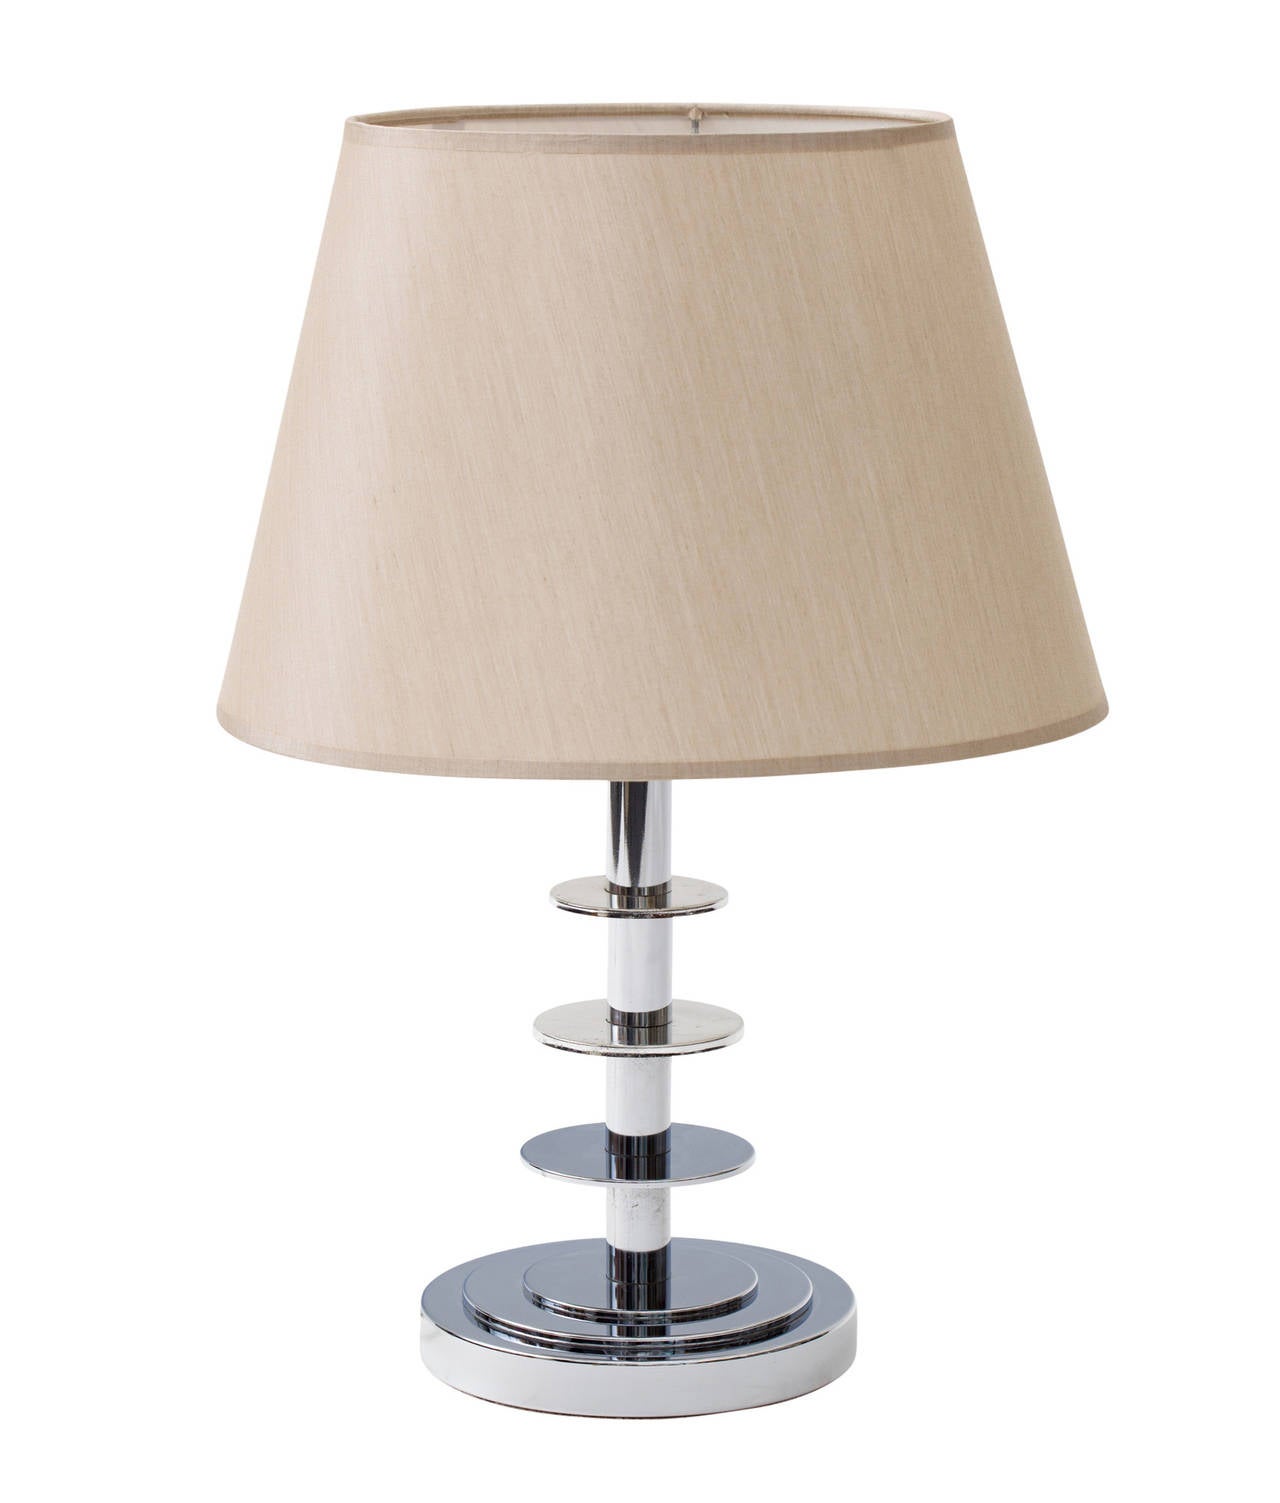 Finely crafted Classic French Art Deco nickeled metal lamp with three circular rings and a round step pedestal base. Double socketed with chandelier bulb sockets.